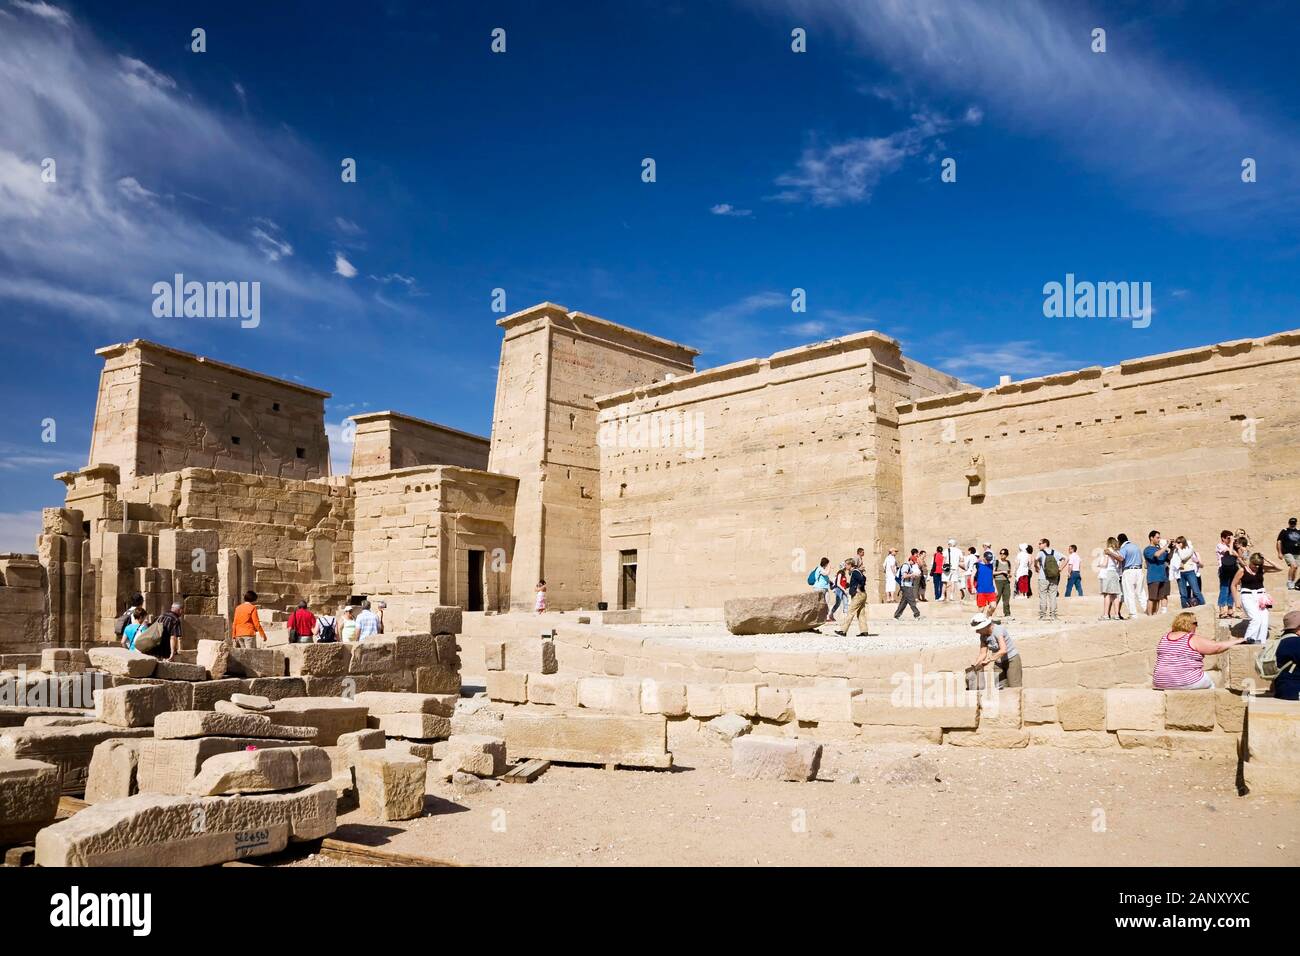 Temple of Isis Philae, also Philae Temple, Agilkia Island in Lake Nasser, Aswan, Egypt, North Africa, Africa Stock Photo